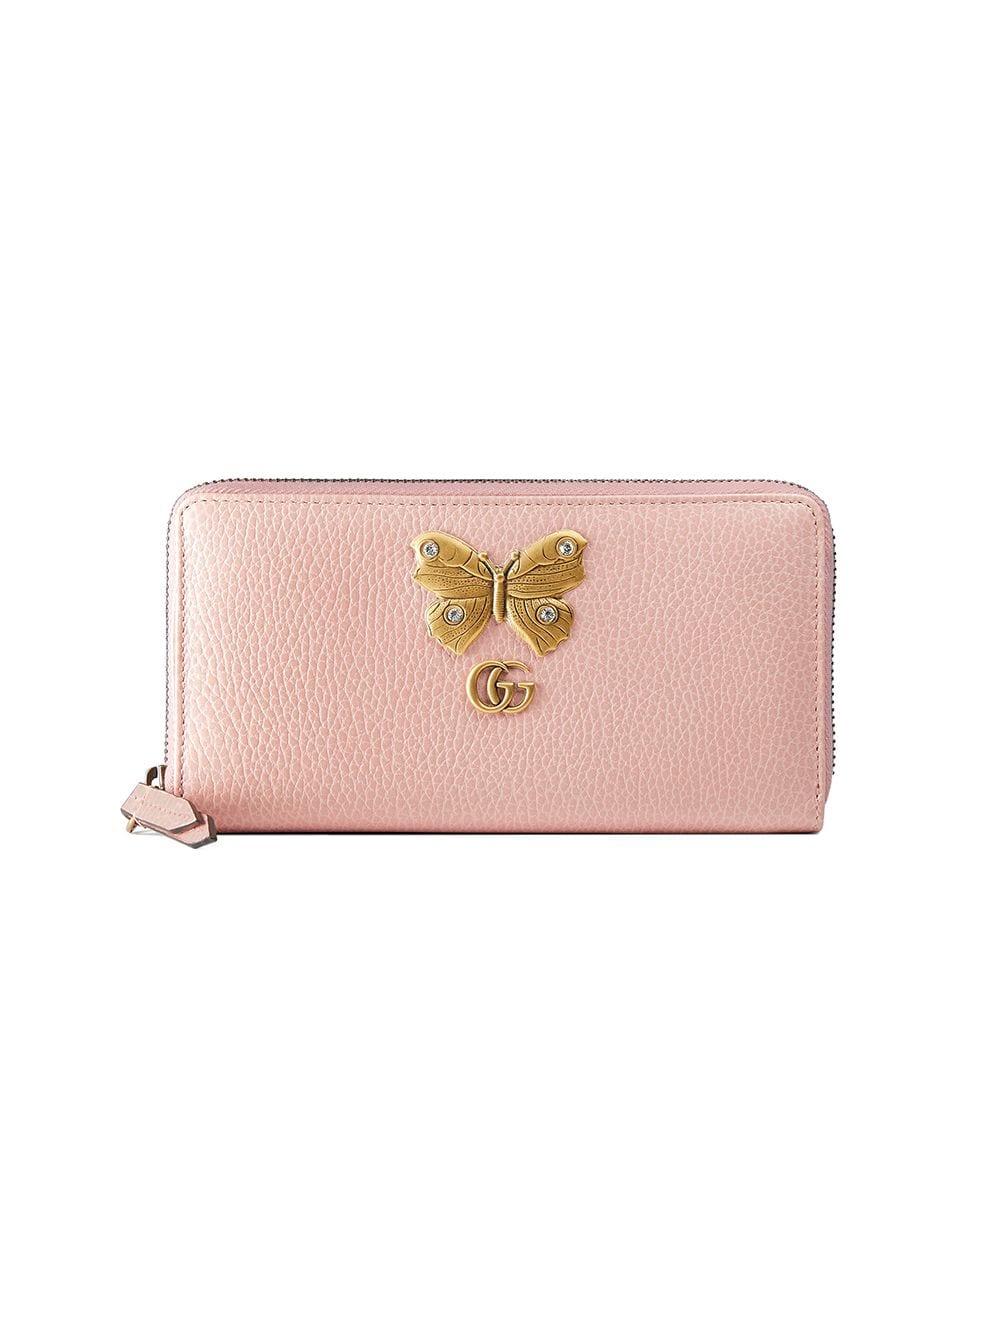 Gucci Leather Zip Around Wallet With Butterfly in Light Pink Leather (Pink) - Save 9% - Lyst